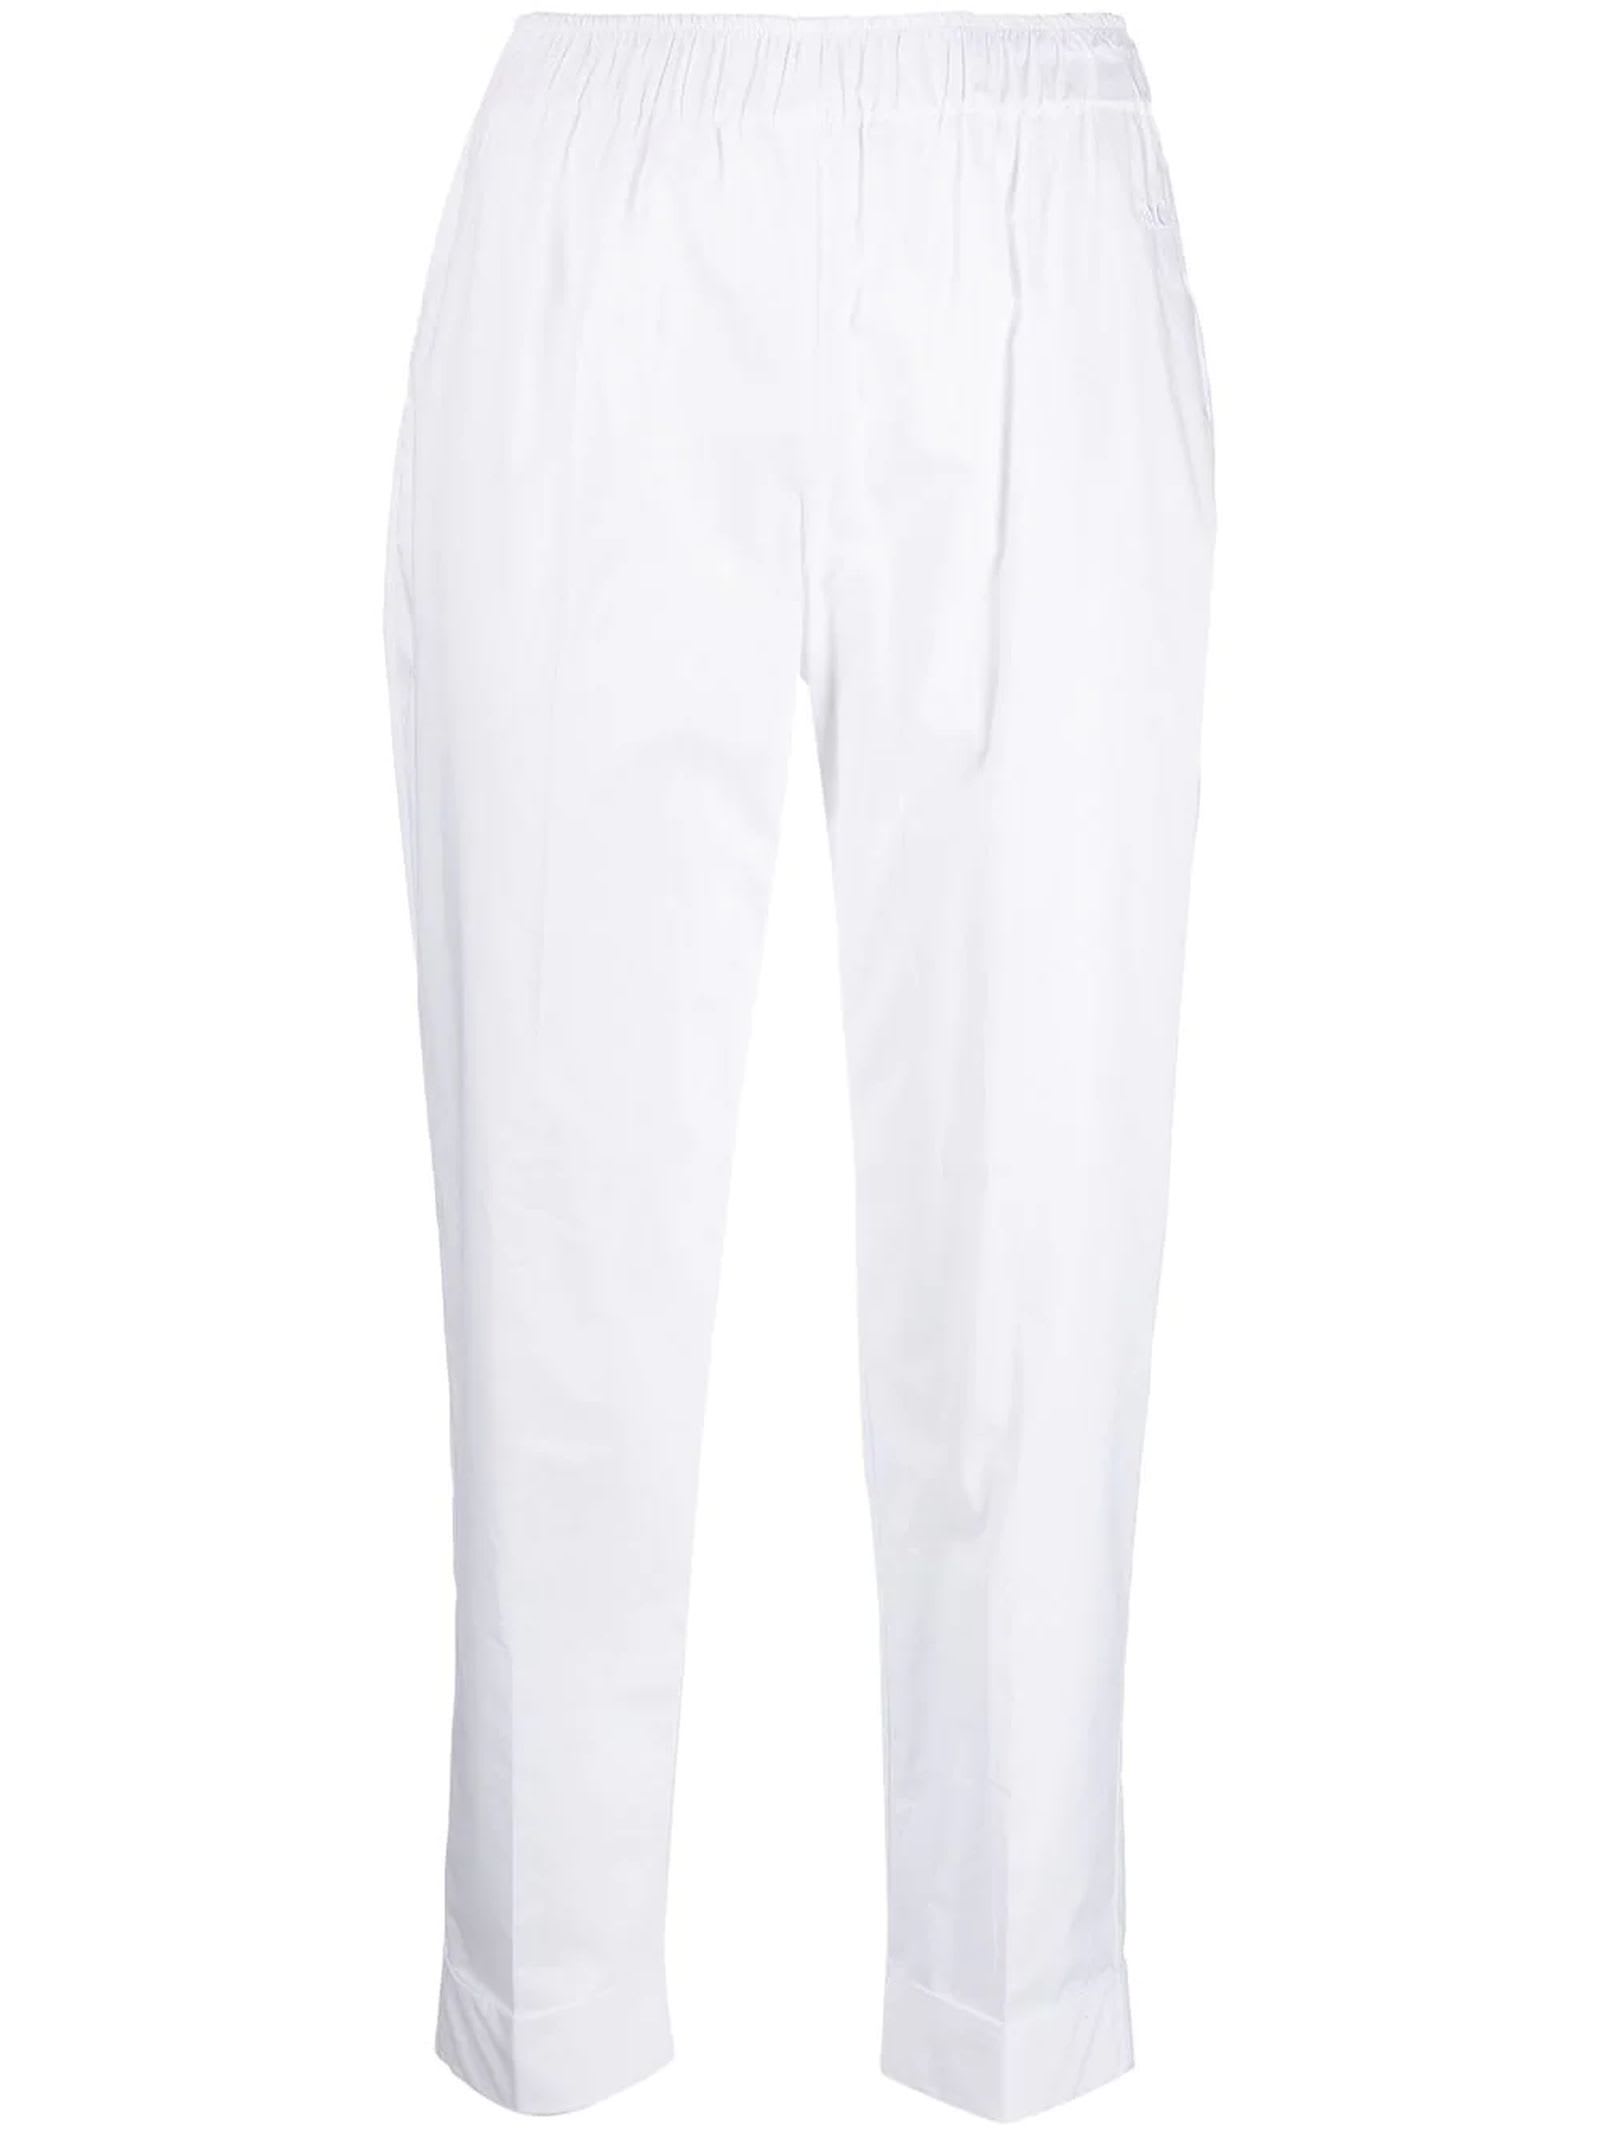 SEMICOUTURE WHITE COTTON CROPPED TROUSERS